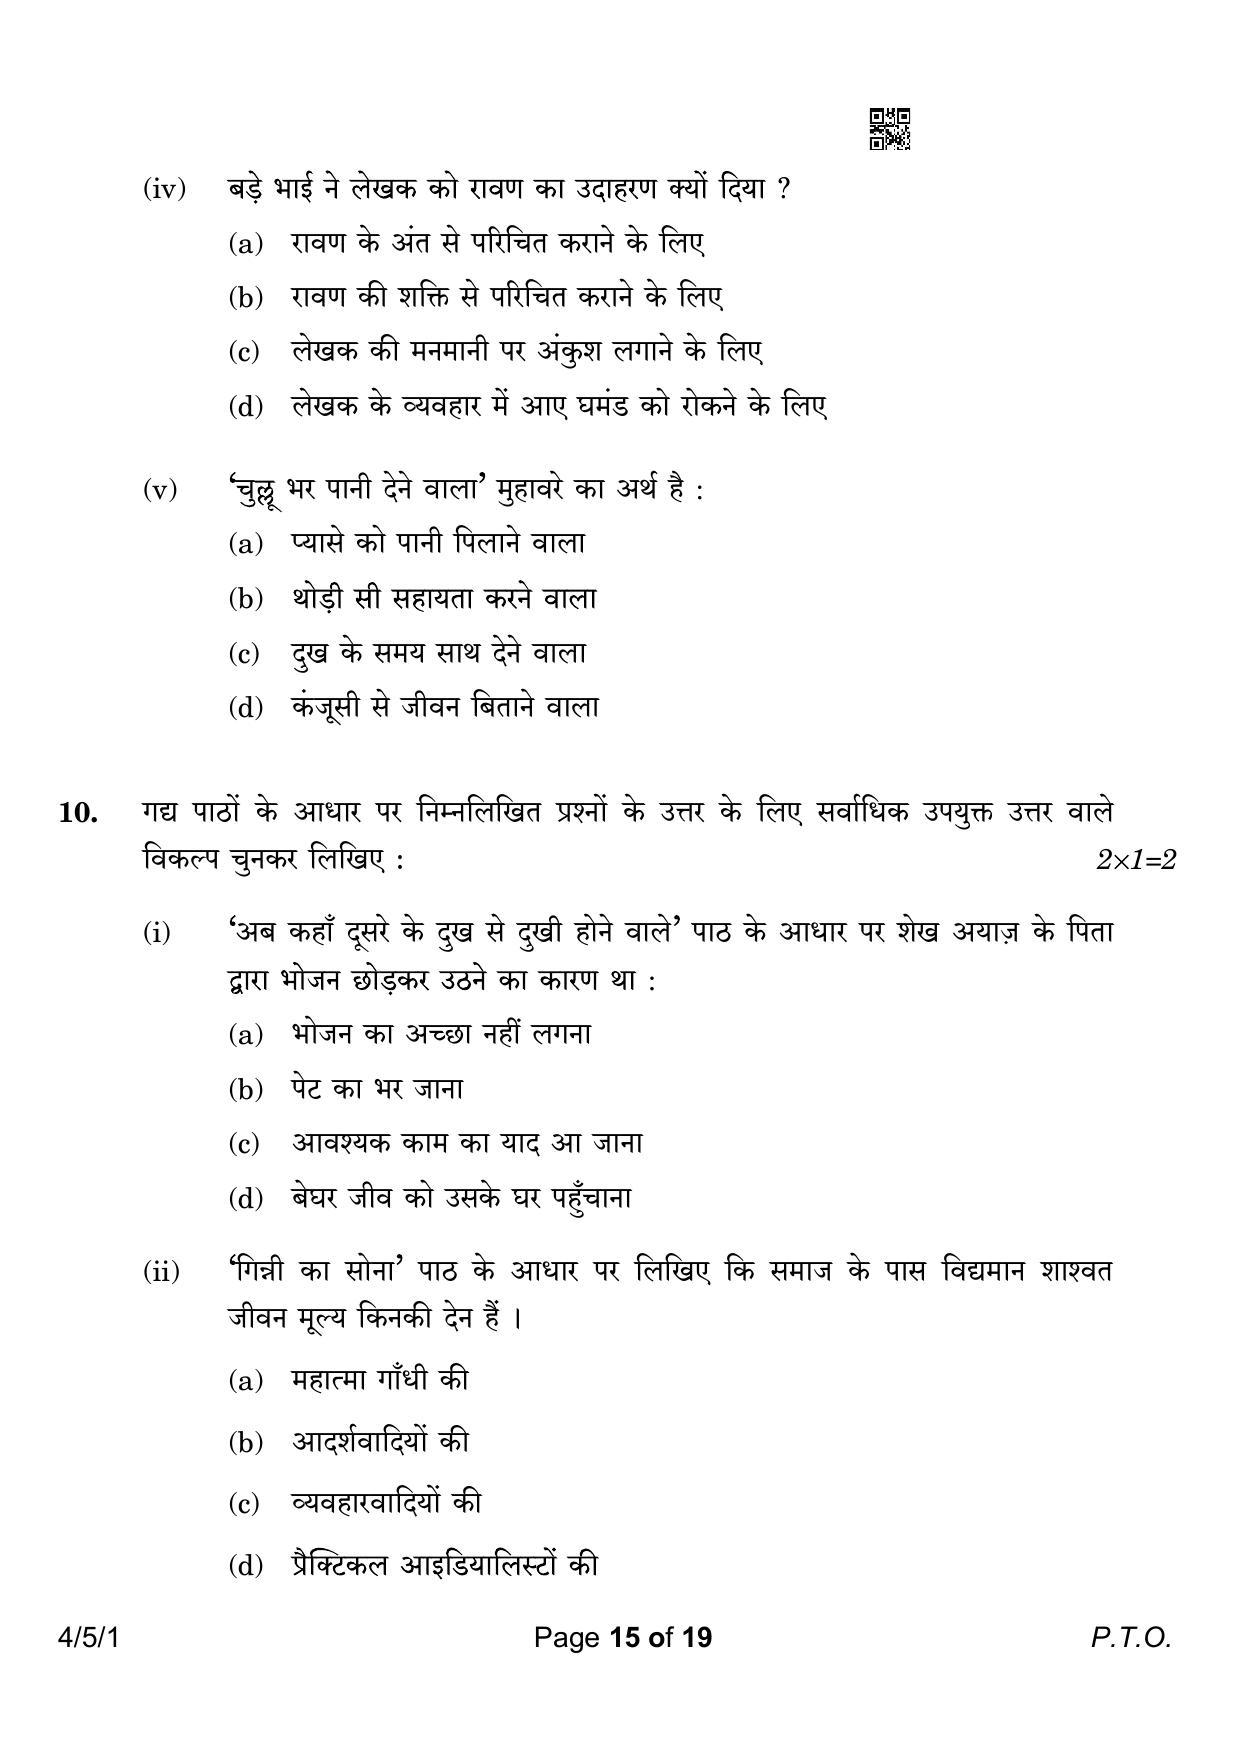 CBSE Class 10 4-5-1 Hindi B 2023 Question Paper - Page 15